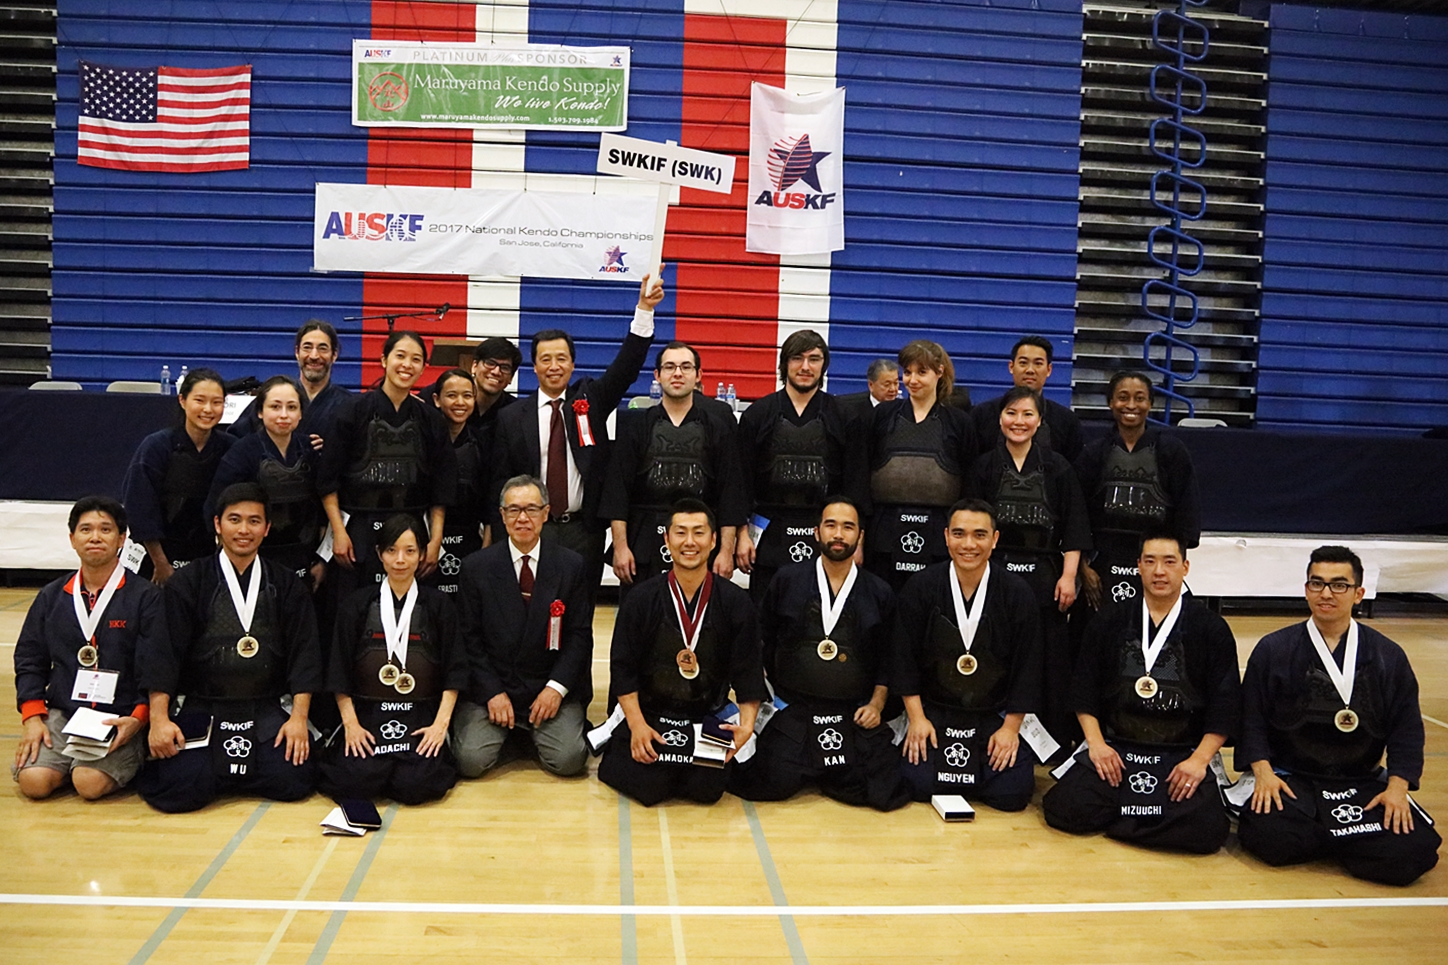  Adachi Sensei and SWKIF Men's team took 3rd place at the AUSKF Championship 